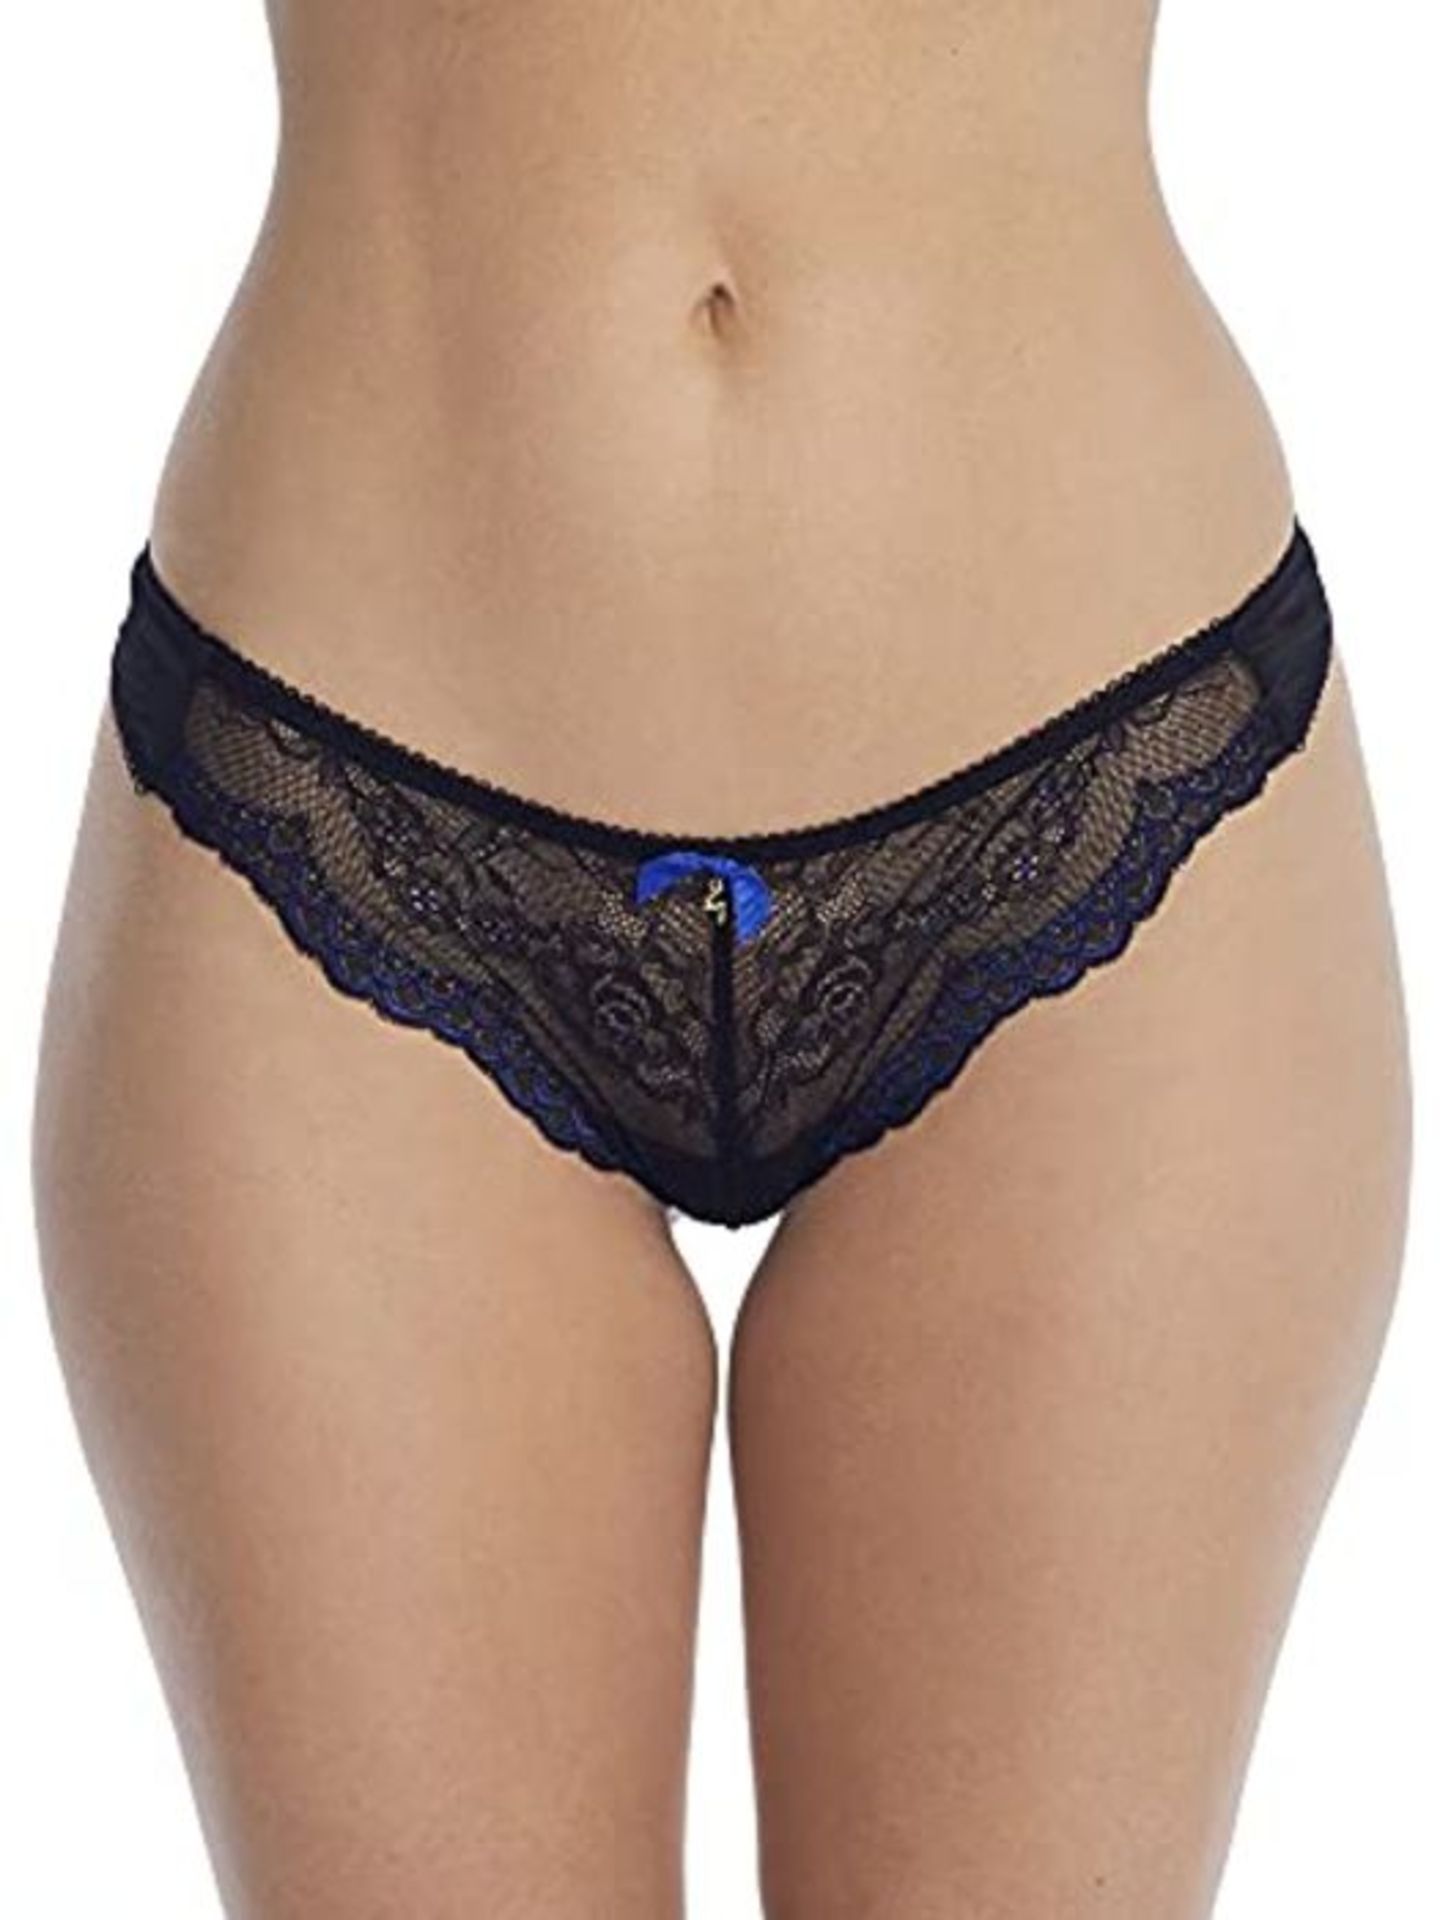 Gossard Women's Superboost Lace Thong Panties, Black/Electric Blue, Extra Small